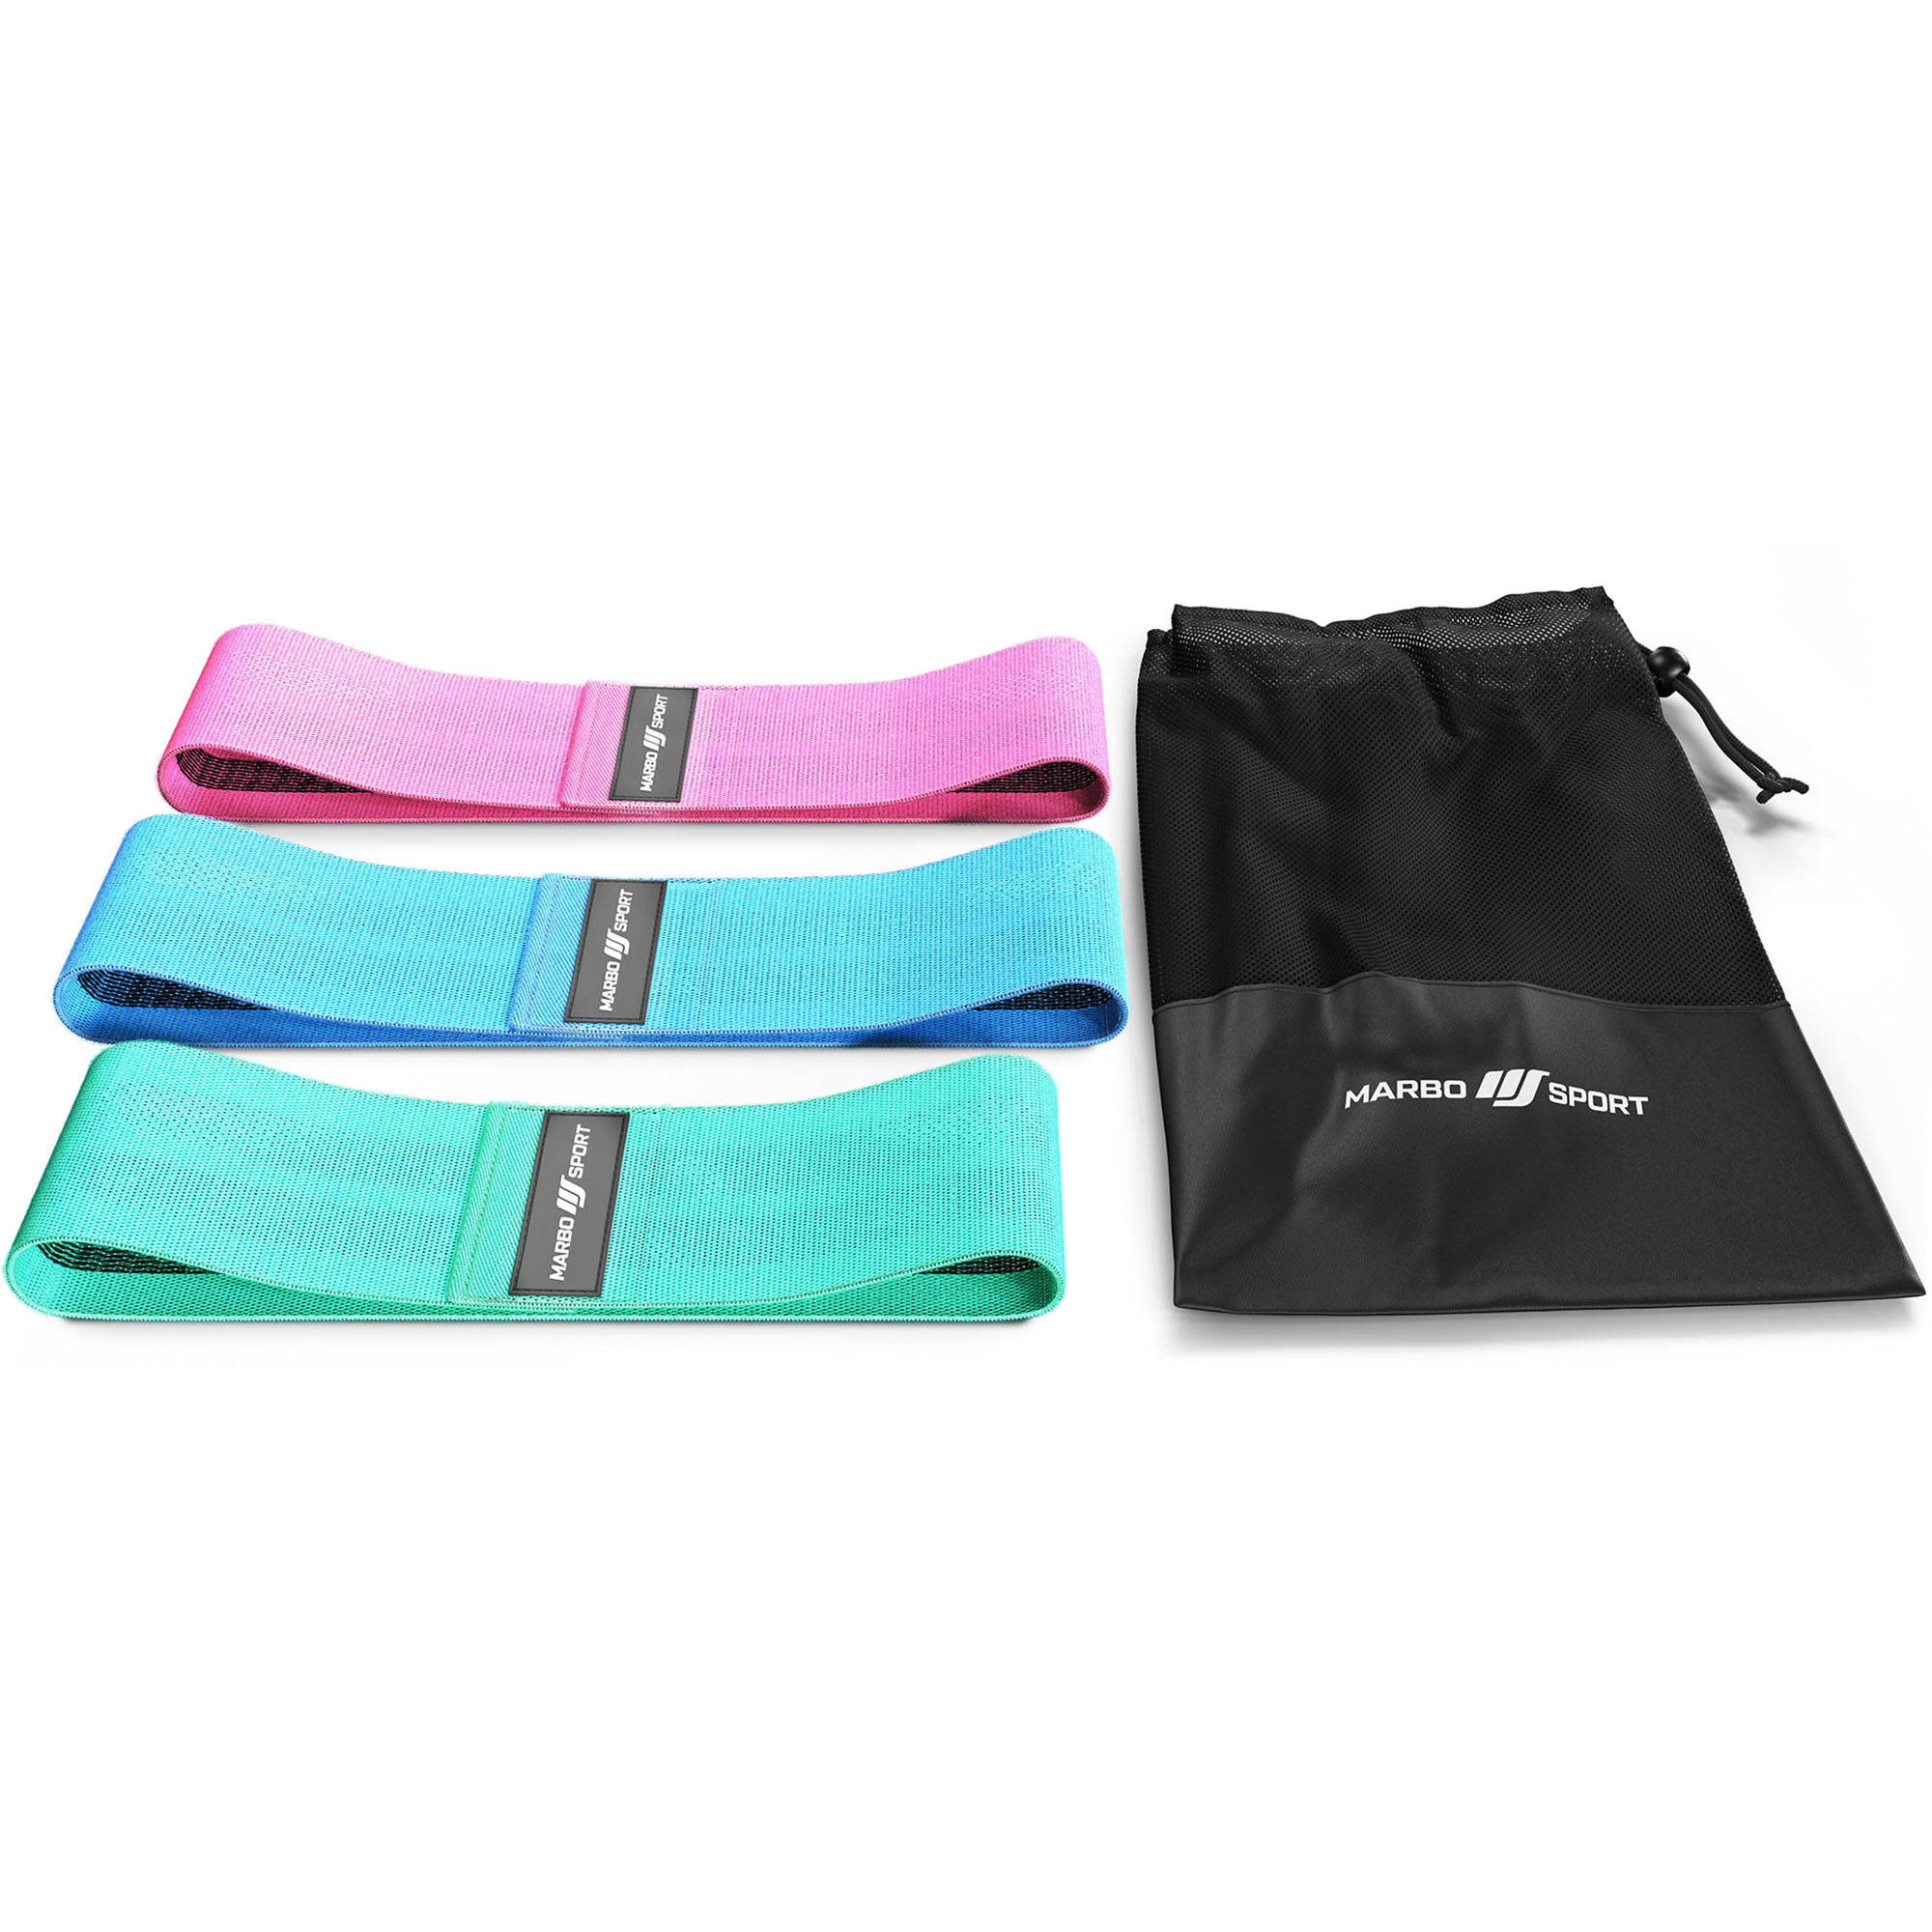 Set of 3 fabric resistance bands - Marbo Sport